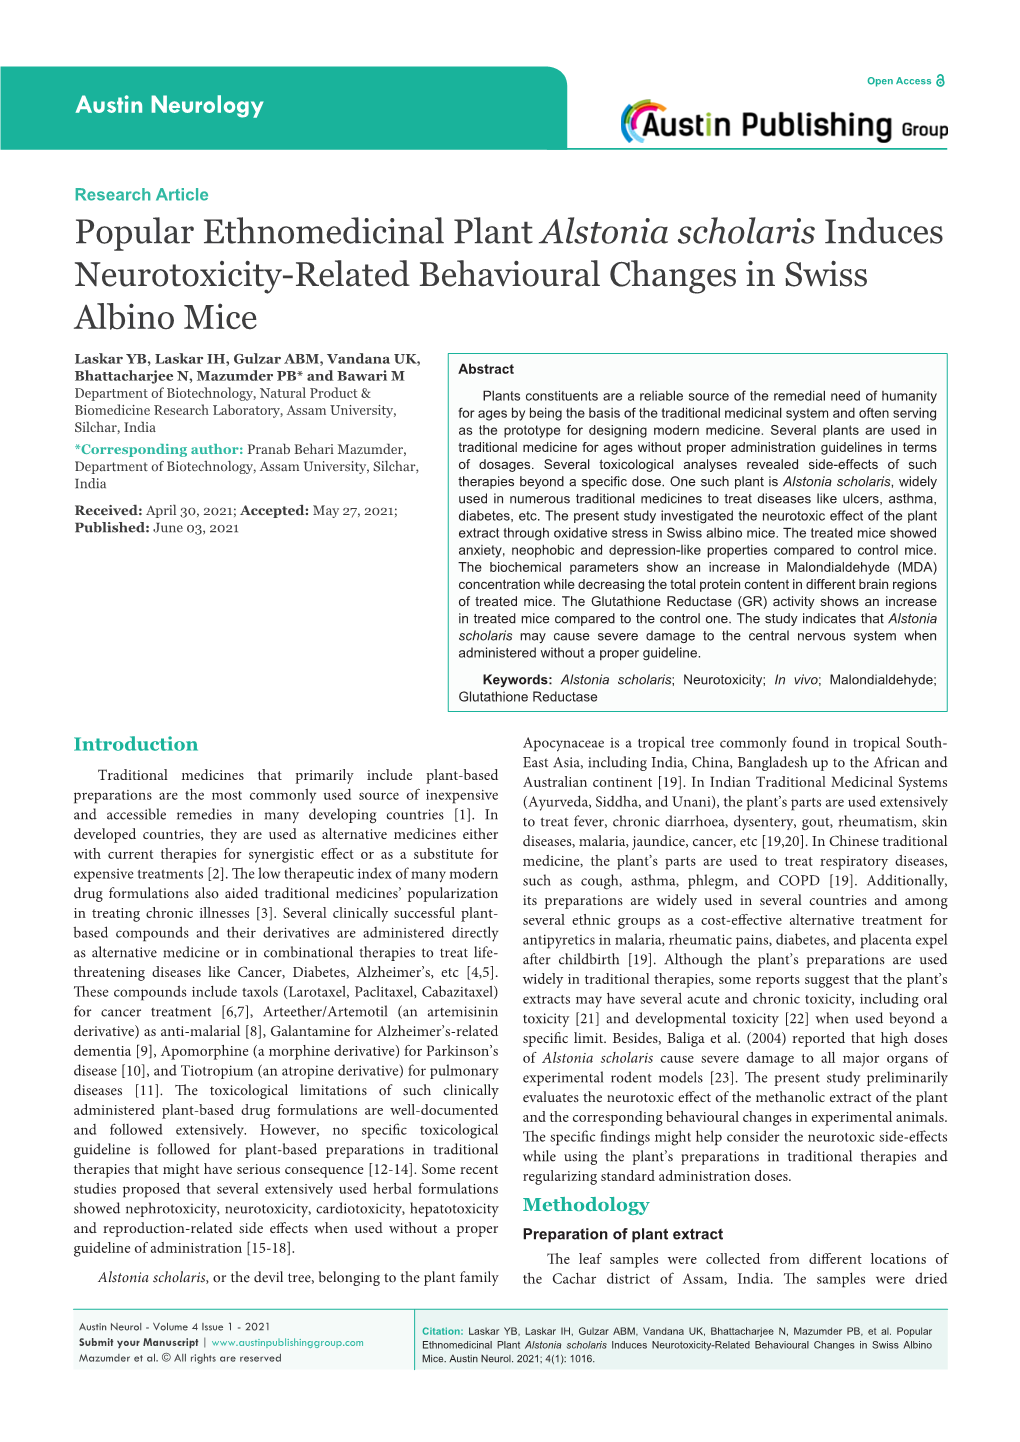 Popular Ethnomedicinal Plant Alstonia Scholaris Induces Neurotoxicity-Related Behavioural Changes in Swiss Albino Mice